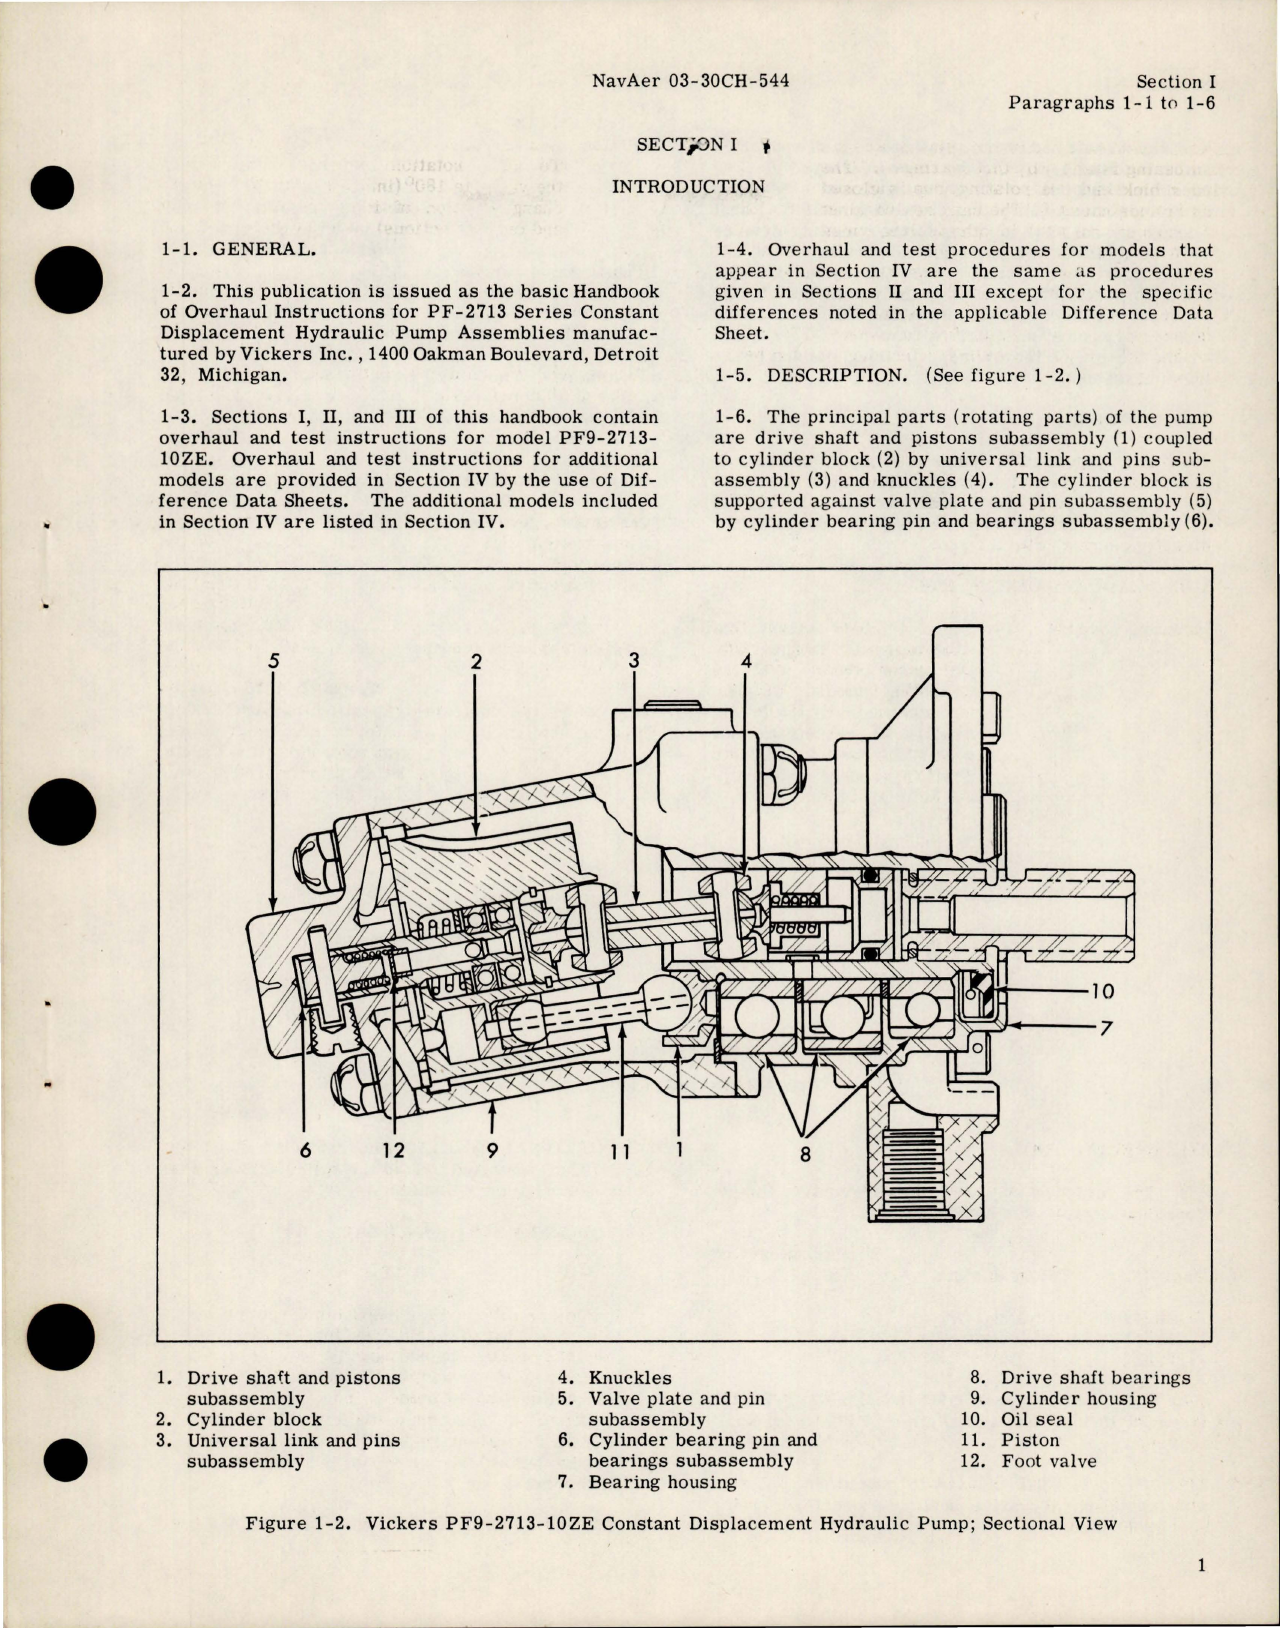 Sample page 5 from AirCorps Library document: Overhaul Instructions for Constant Displacement Hydraulic Pump Assemblies - PF-2713 Series 